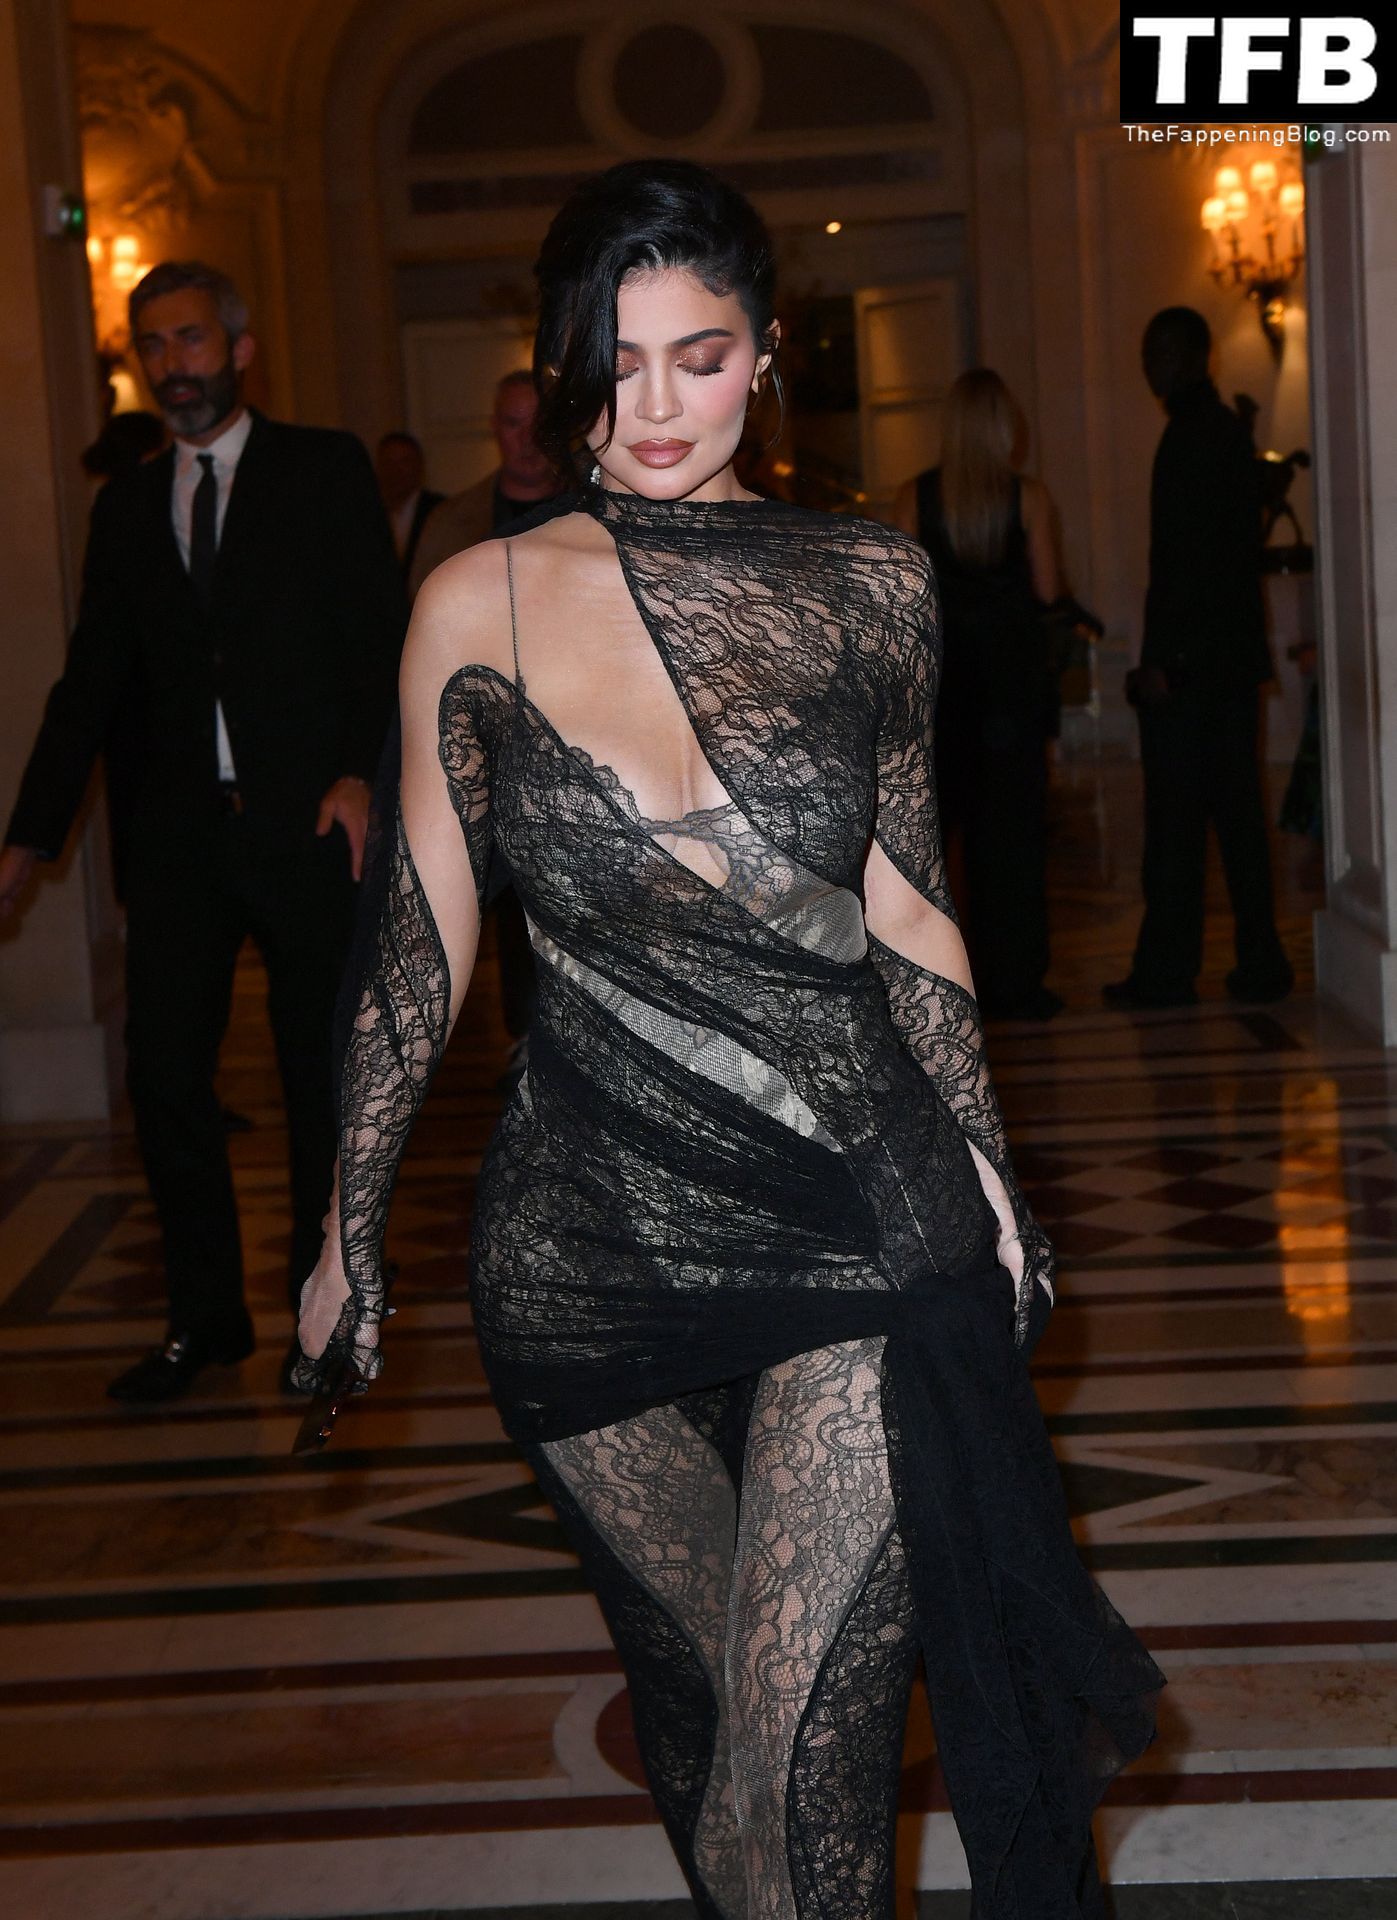 Kylie Jenner Attends the Business of Fashion in Paris (166 Photos)